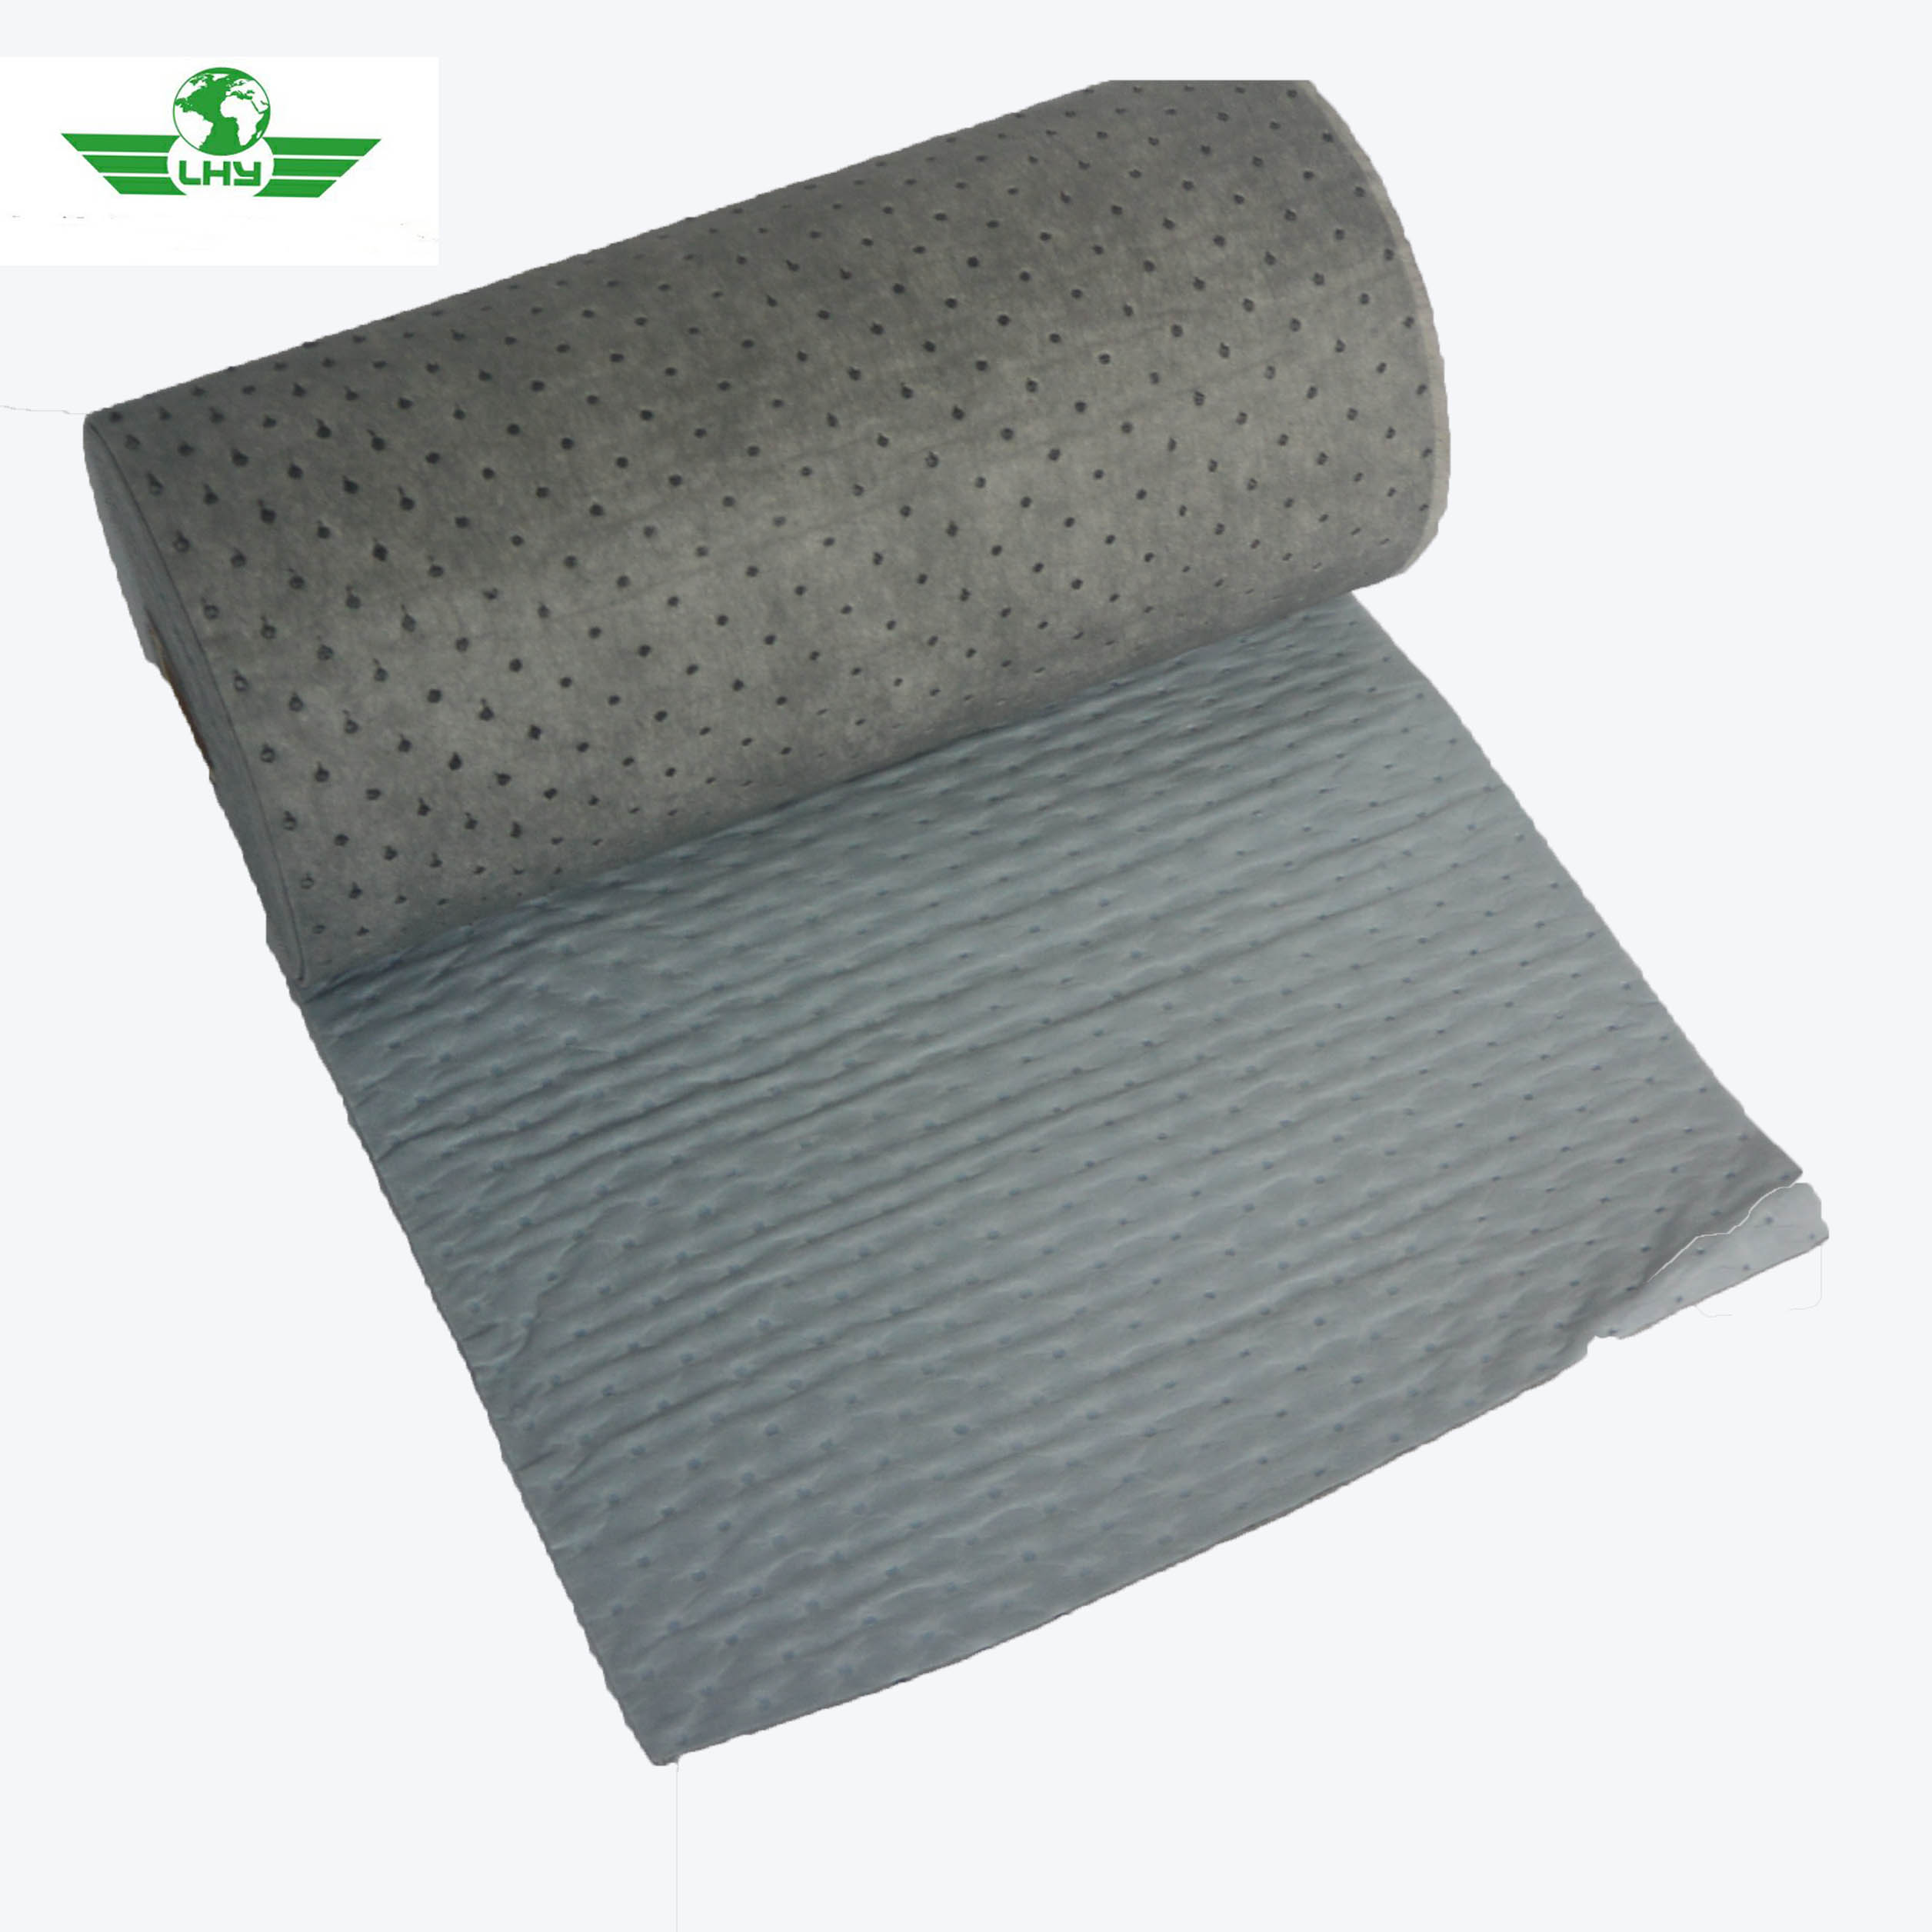 Meltblown oil absorbent pad non woven universal absorbent roll for generasl spill